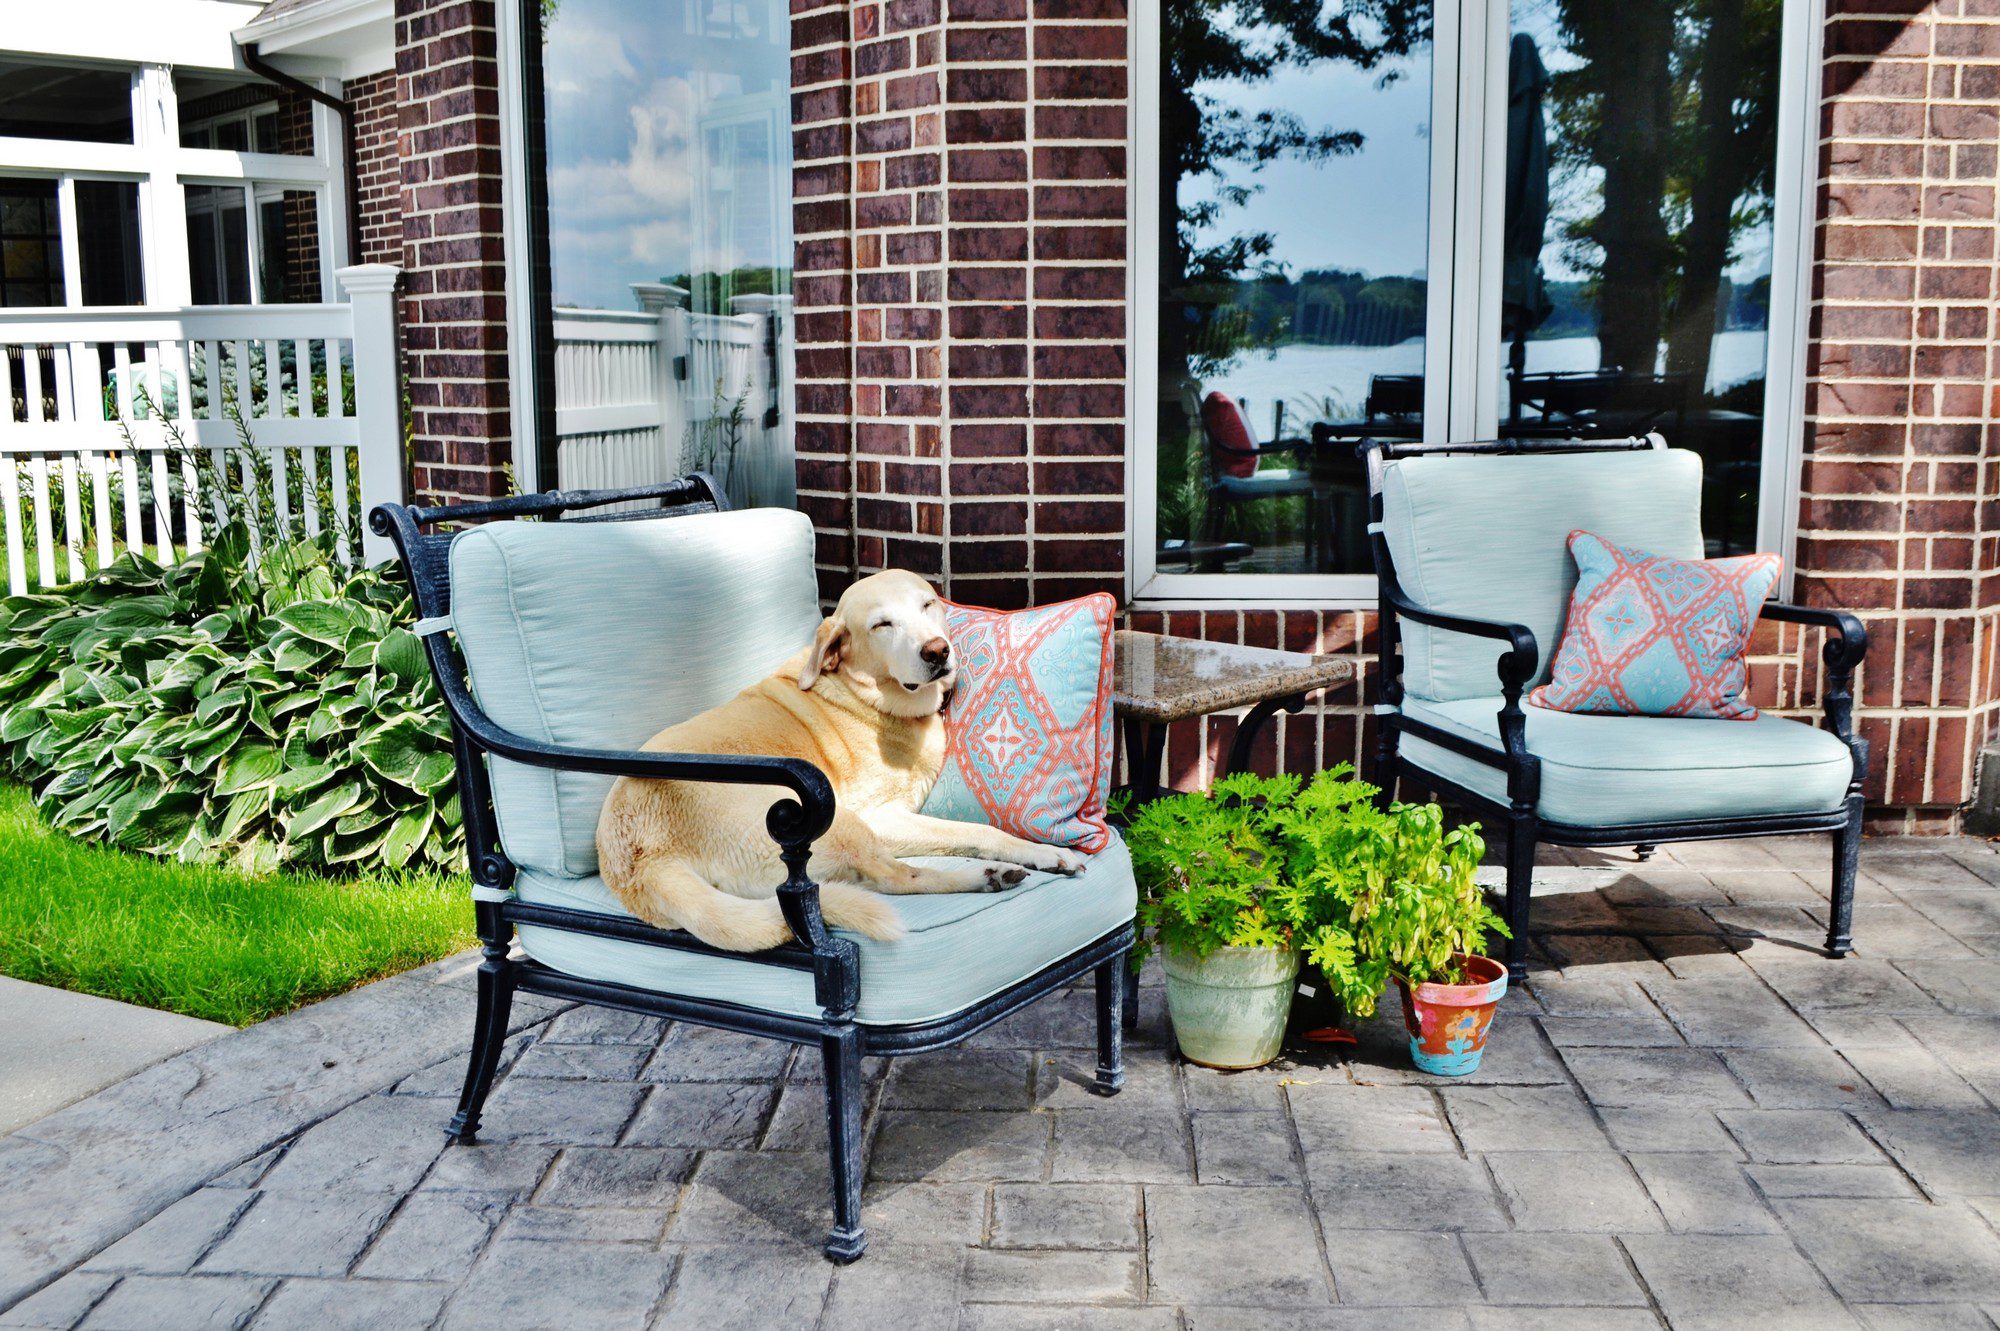 The image shows an outdoor patio area of a house with brick exterior walls and large windows. There are two metal-framed patio chairs with light blue cushions and patterned throw pillows. A happy-looking dog is lying comfortably on one of the chairs, enjoying the outdoors. There are potted plants placed on the patio pavers, and a lush green lawn can be seen adjacent to the patio area. In the background, through the reflection on the window, a body of water and trees are visible, suggesting that the house is located near a lake or a similar water feature. The overall atmosphere of the image is relaxed and serene.